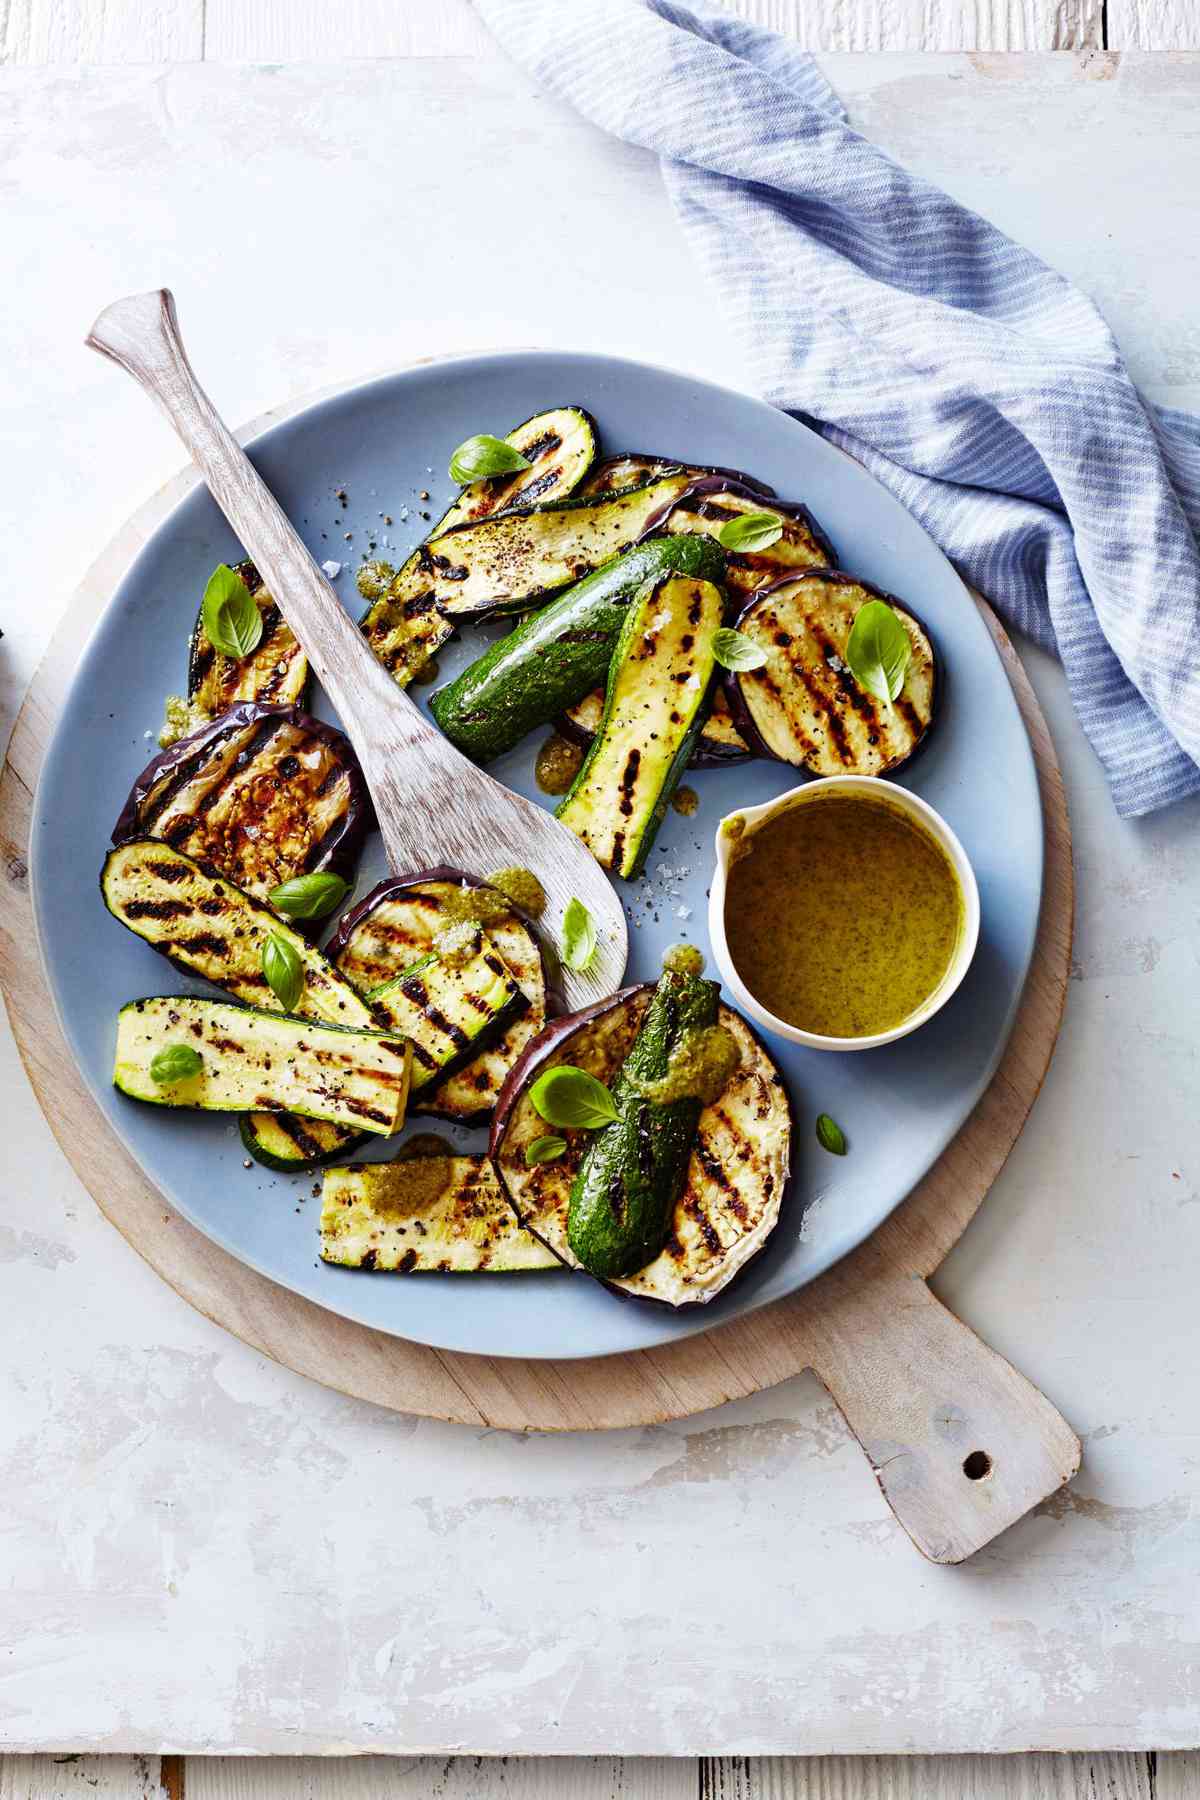 Grilled Zucchini and Eggplant with Basil Vinaigrette